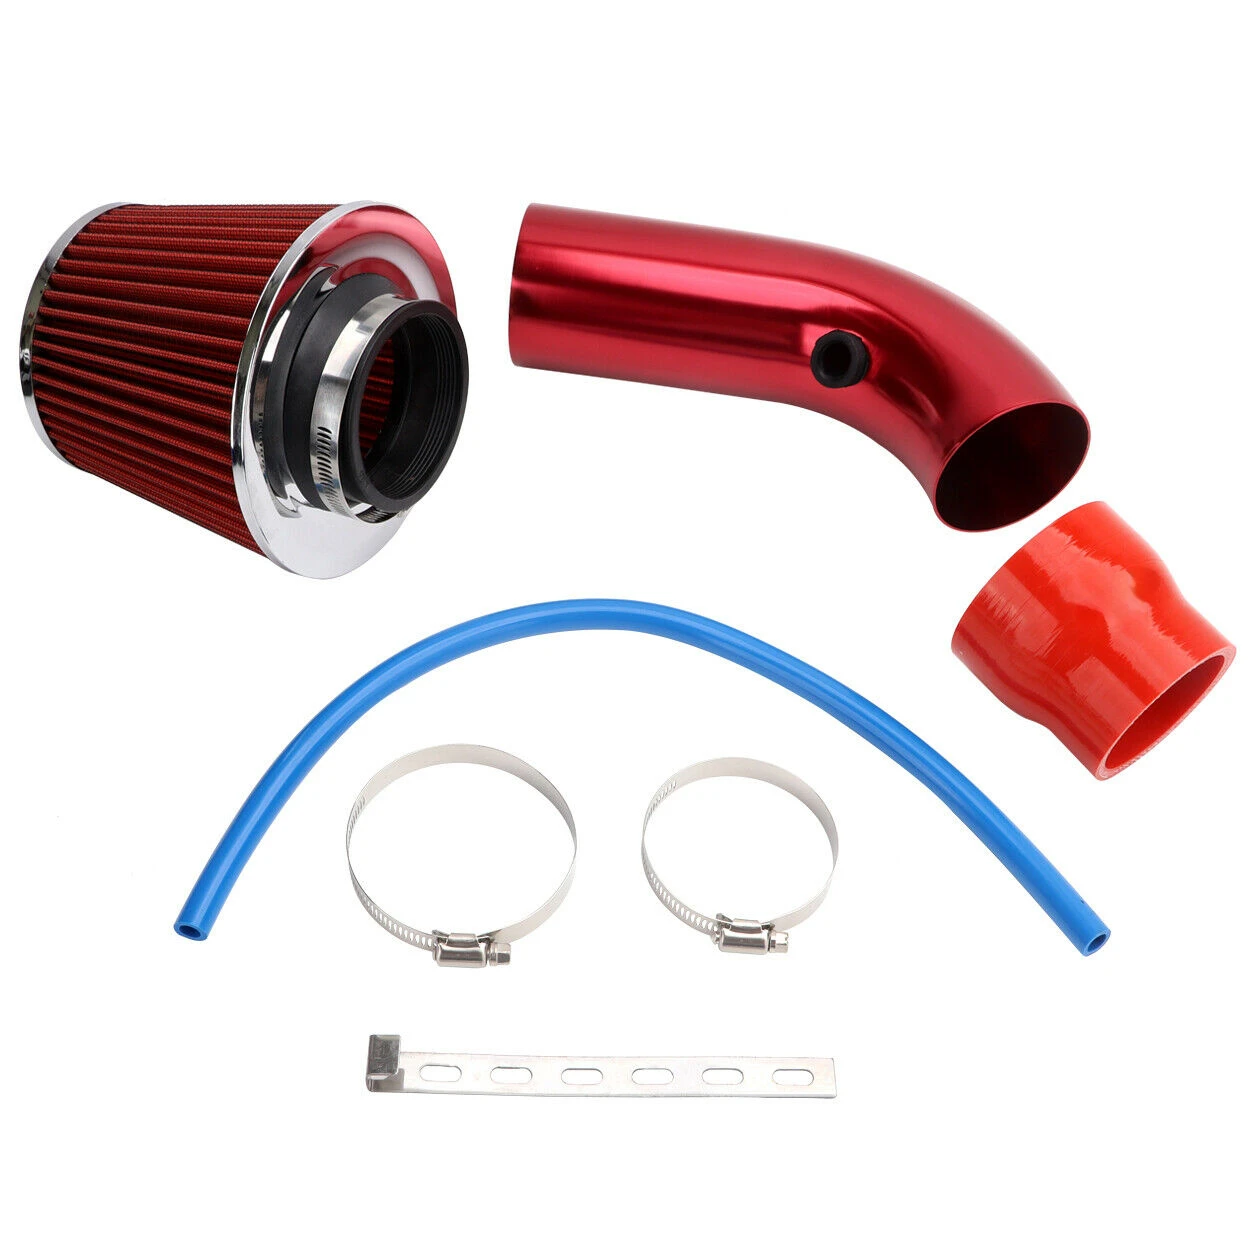 Image 21 - Universal Car Cold Air Intake Filter Induction Pipe Power Flow Hose System Red